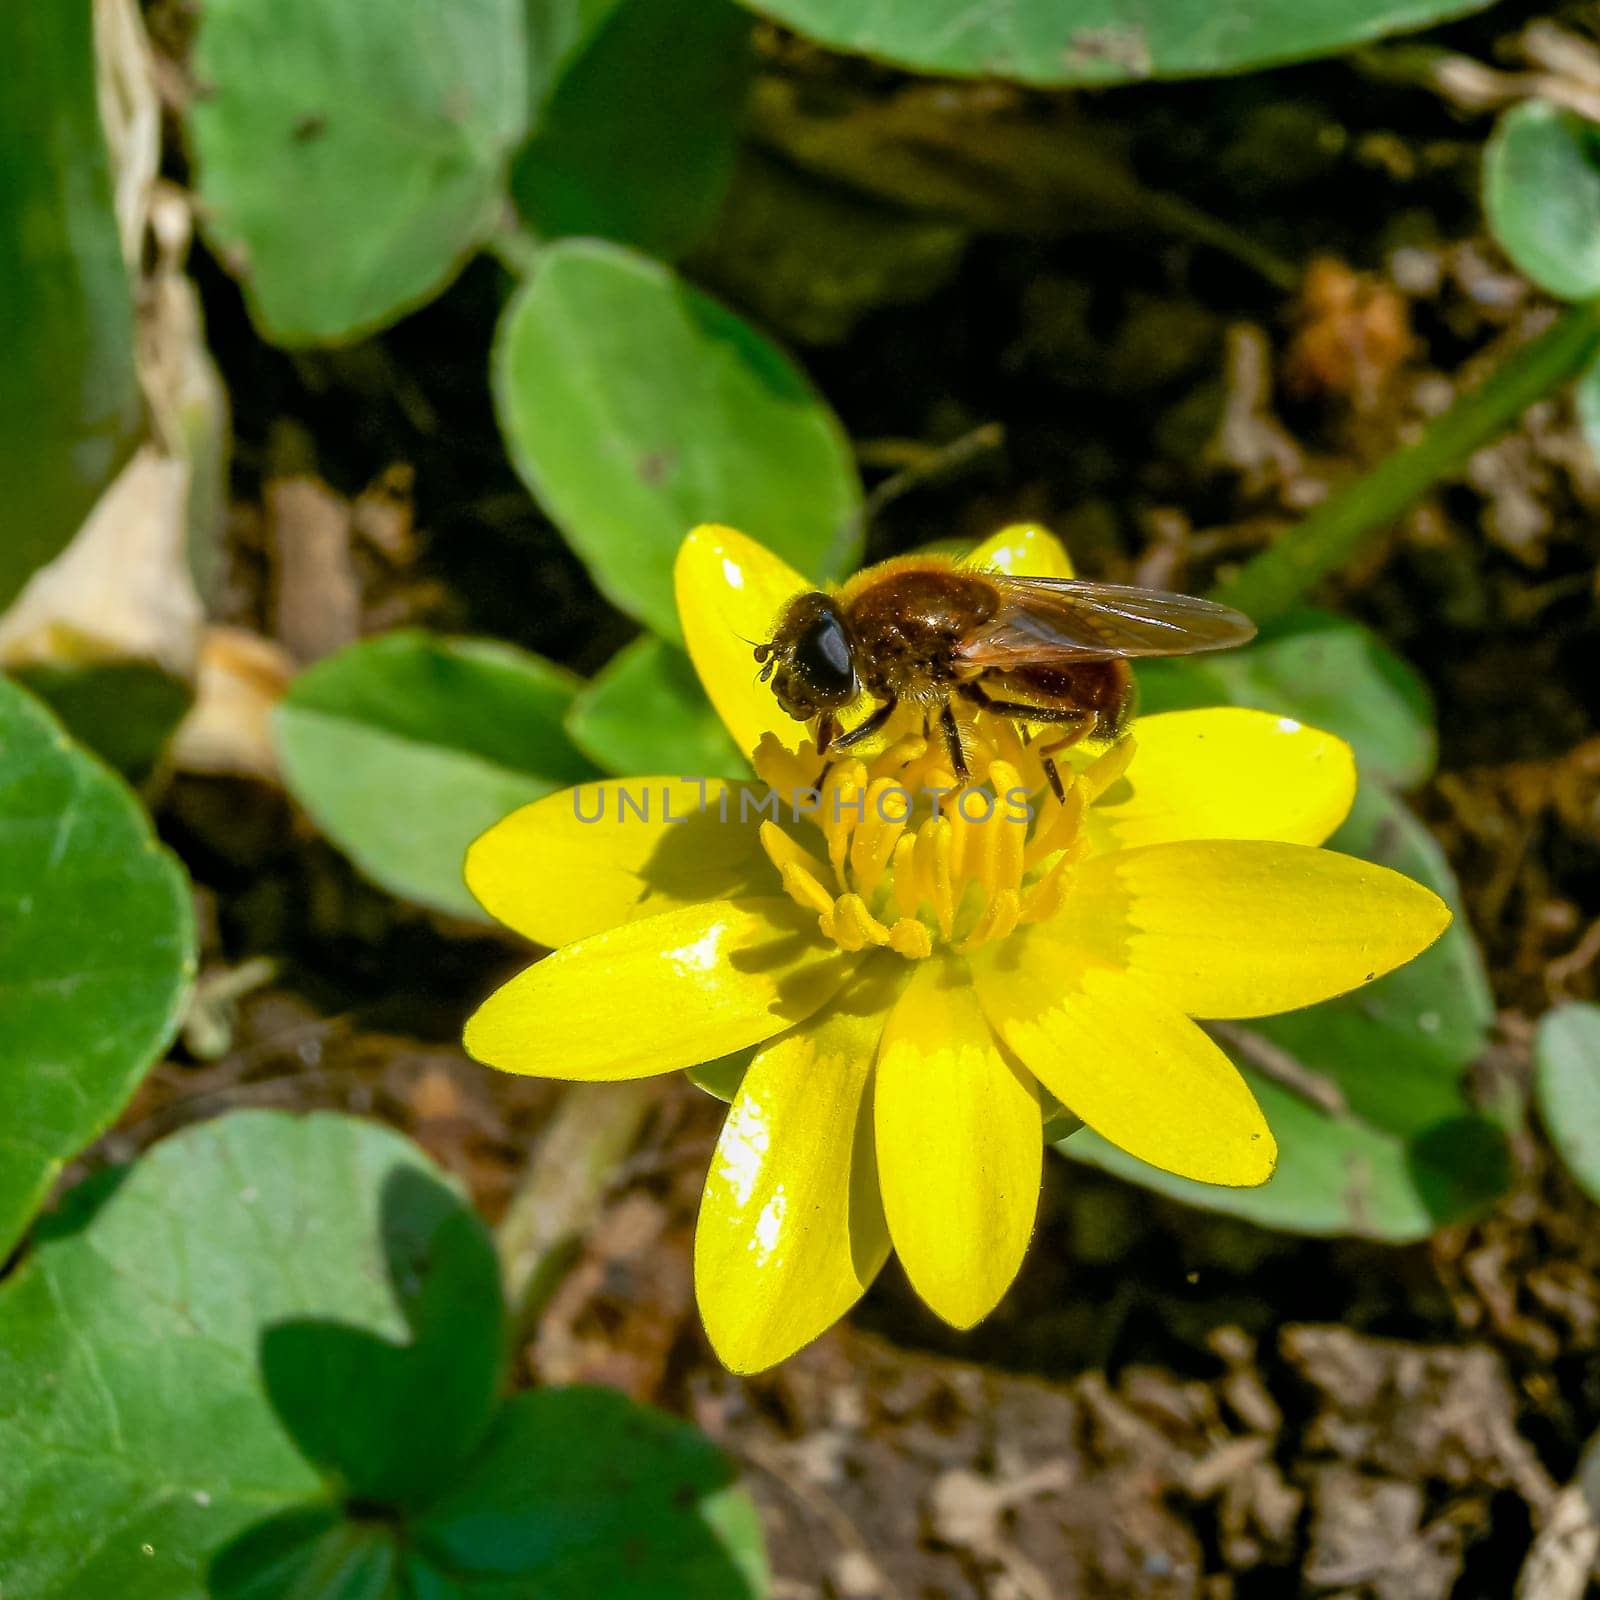 Insects on flowers lesser celandine or pilewort (Ficaria verna, Ranunculus ficaria) by Hydrobiolog